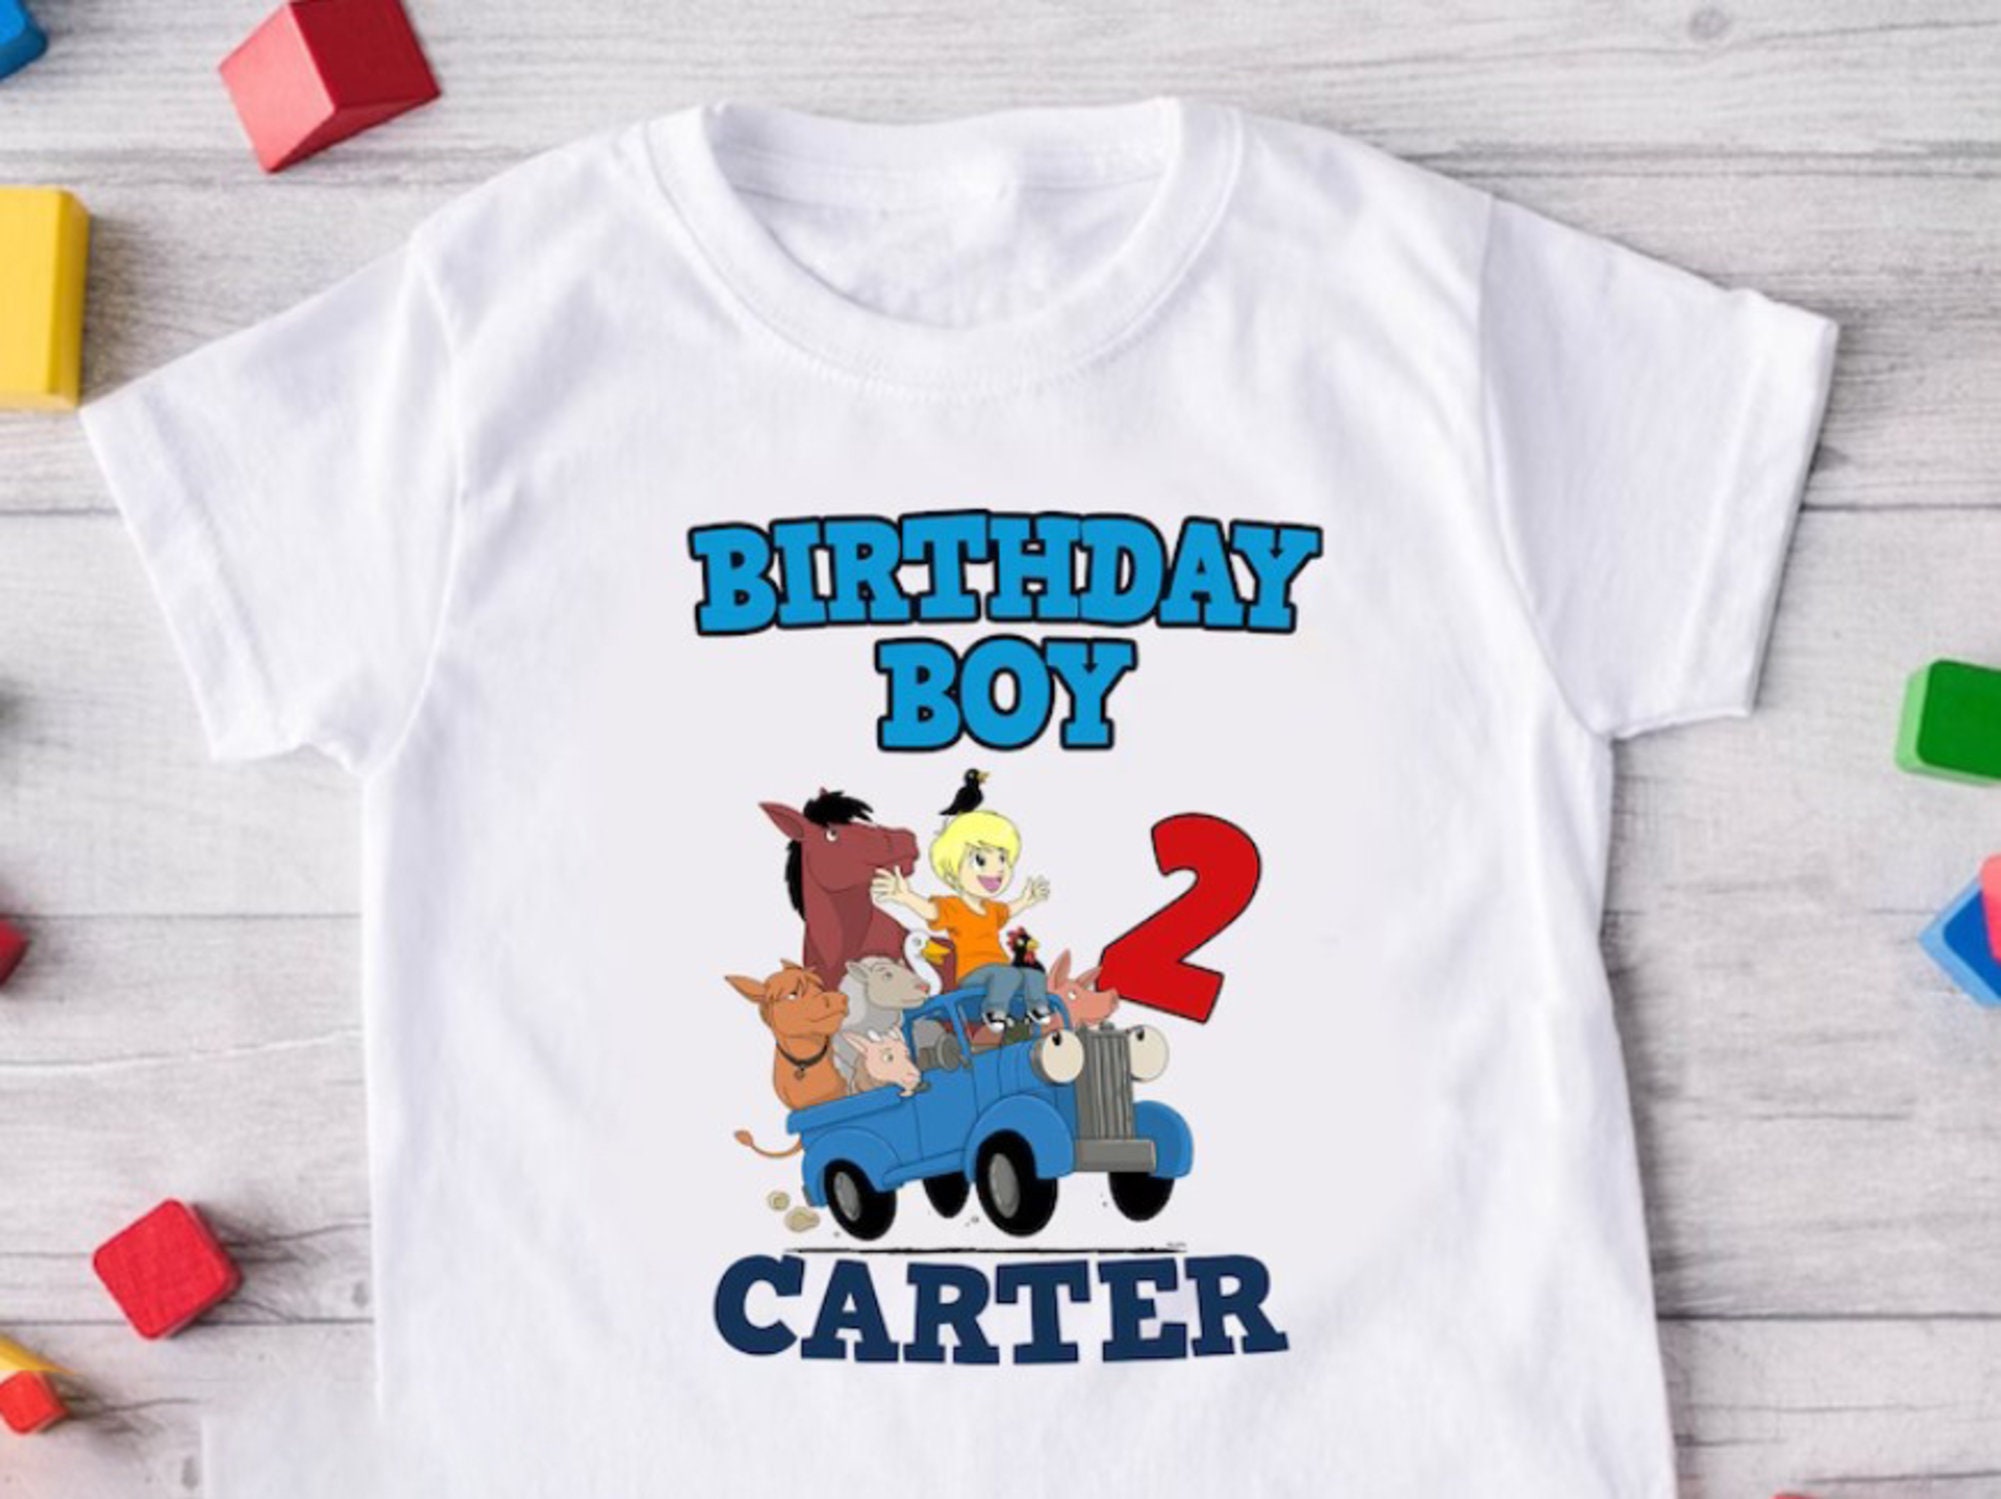 pick up truck blue pickup bday vintage truck boy's birthday shirt navy and green Little truck Birthday Blue truck shirt Kleding Jongenskleding Tops & T-shirts Truck Party 